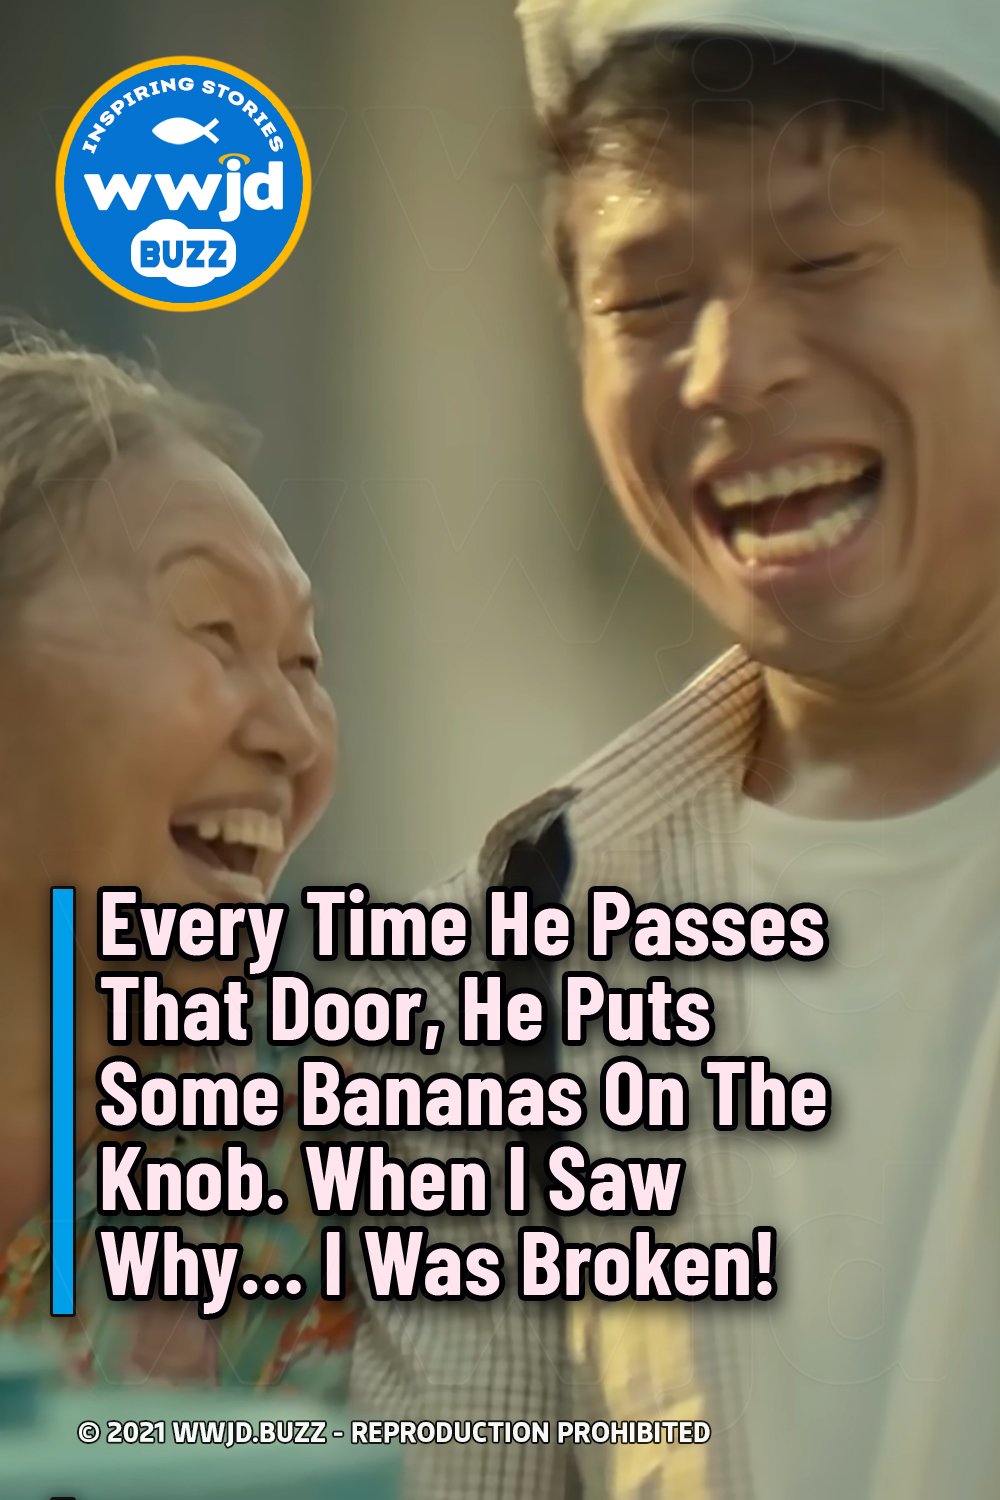 Every Time He Passes That Door, He Puts Some Bananas On The Knob. When I Saw Why... I Was Broken!